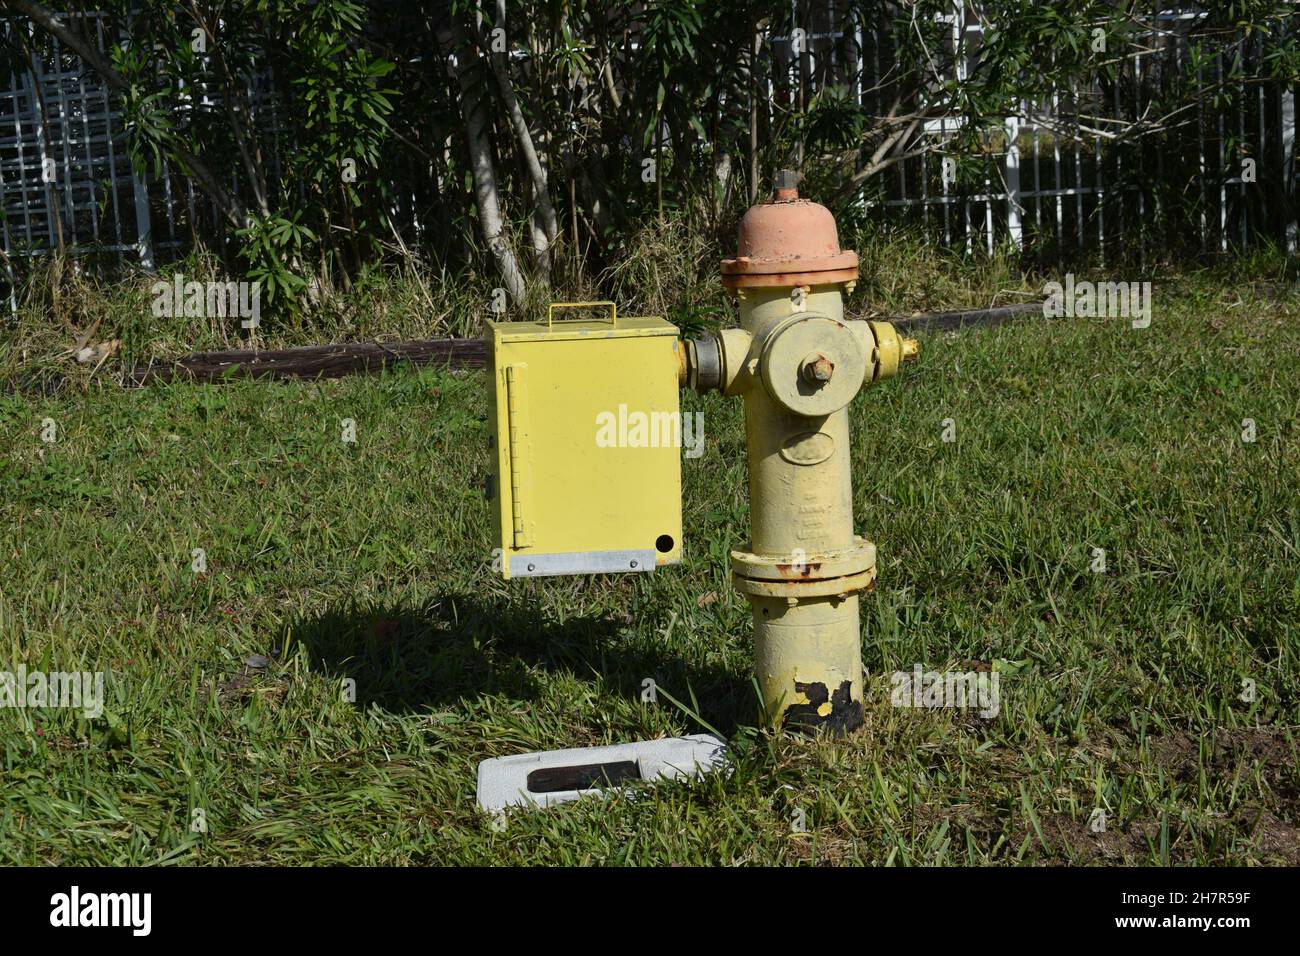 A yellow box attached to an old fire hydrant. Stock Photo